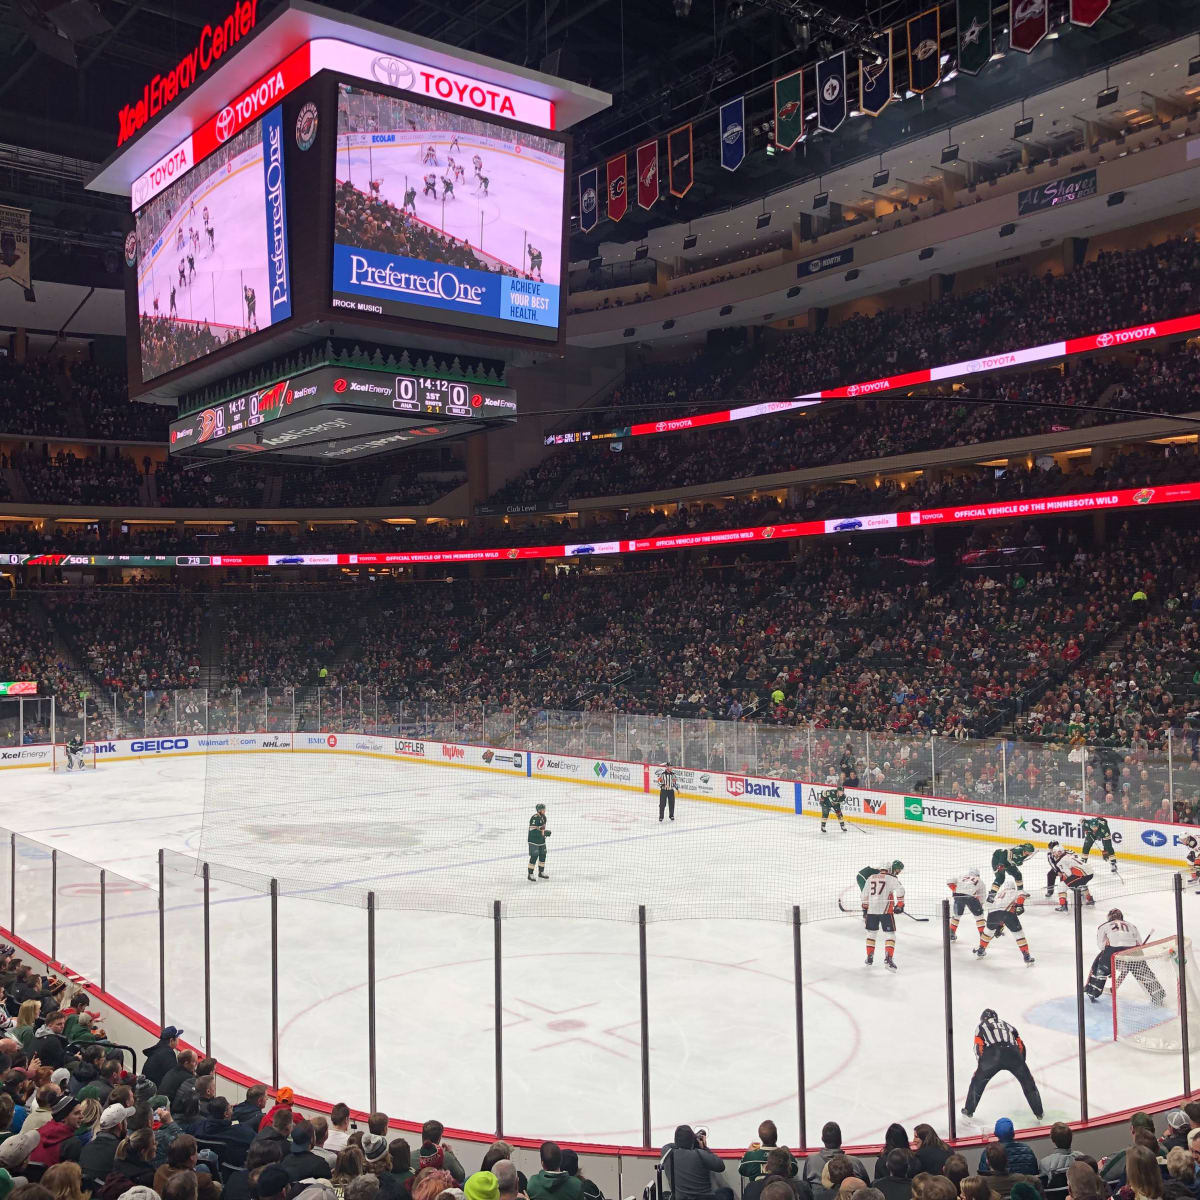 Minnesota Wild game Tuesday only available via streaming